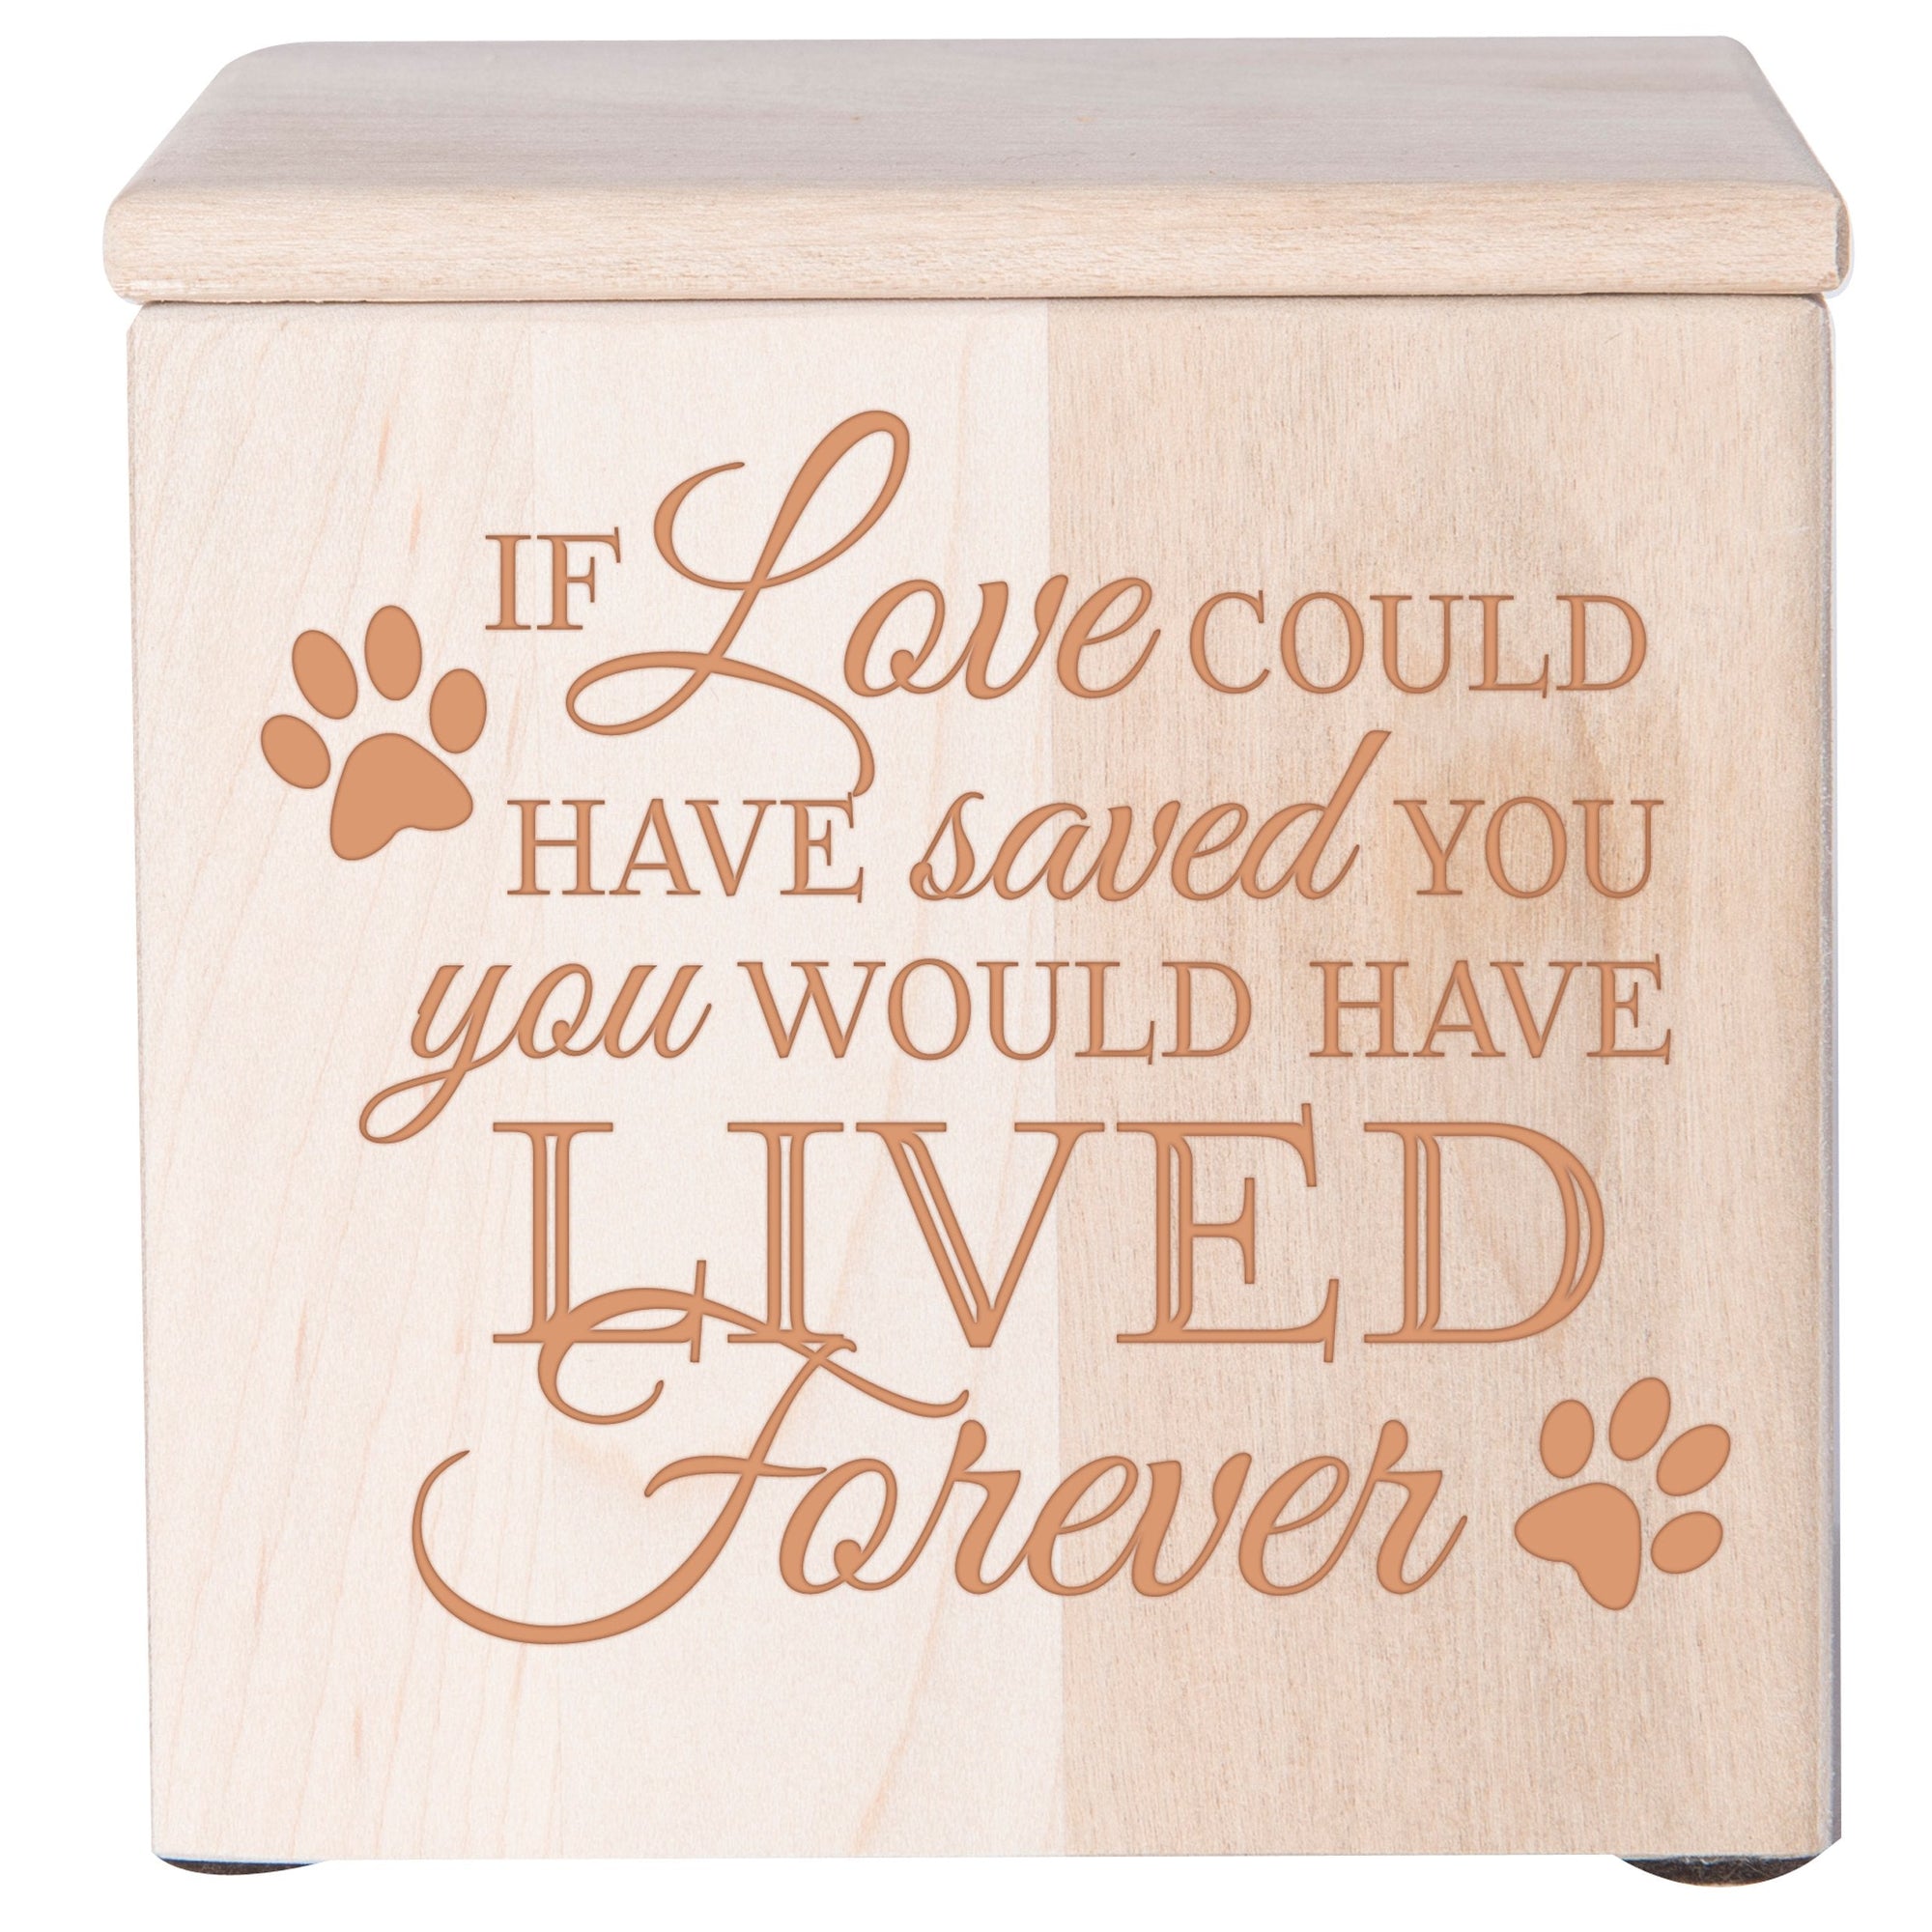 Maple Pet Memorial 3.5x3.5 Keepsake Urn with phrase "If Love could Have Saved You"